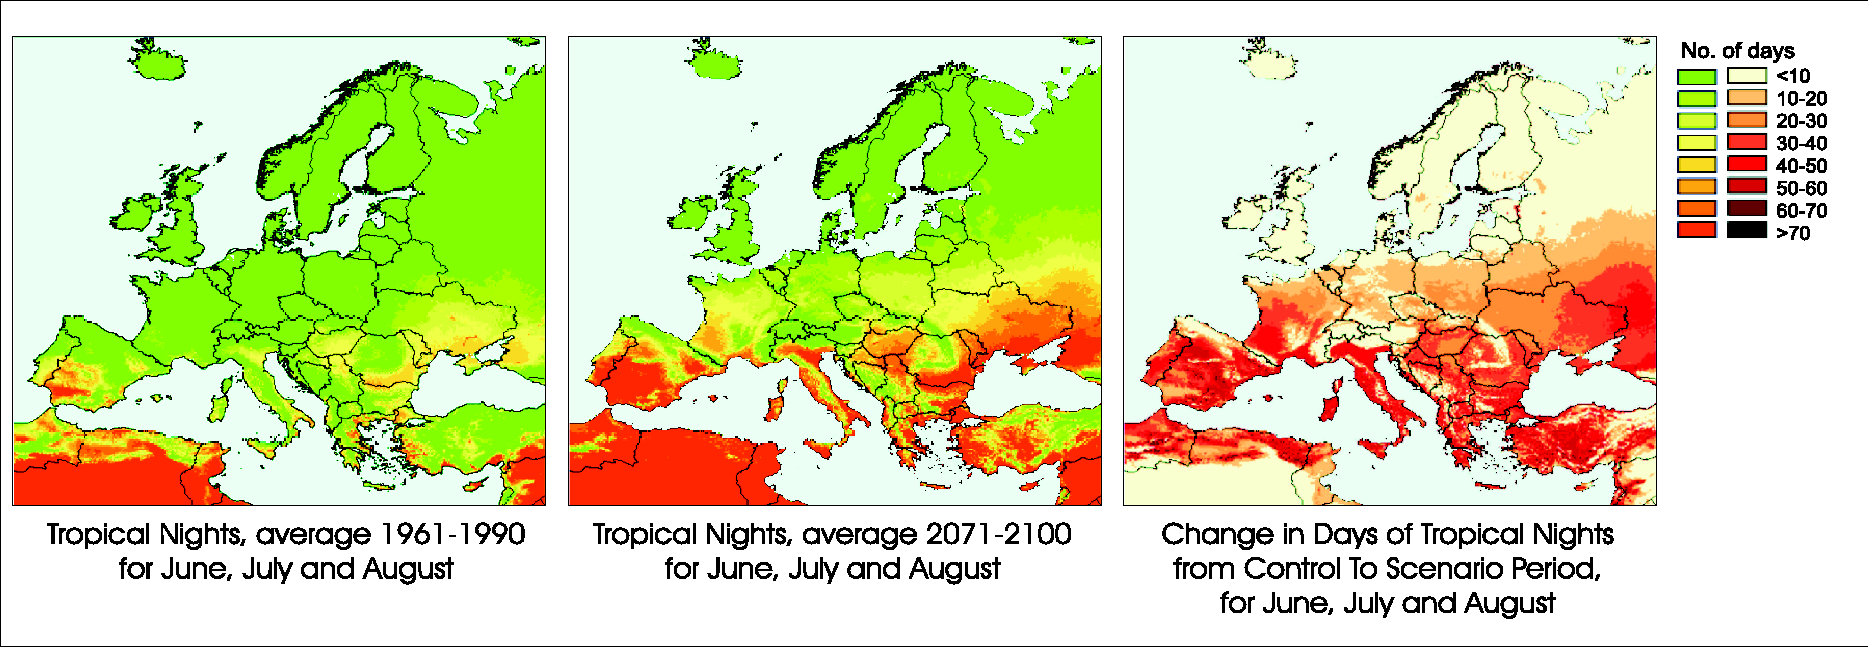 Modelled number of tropical nights over Europe during summer (June-August) 1961-1990 and 2071-2100